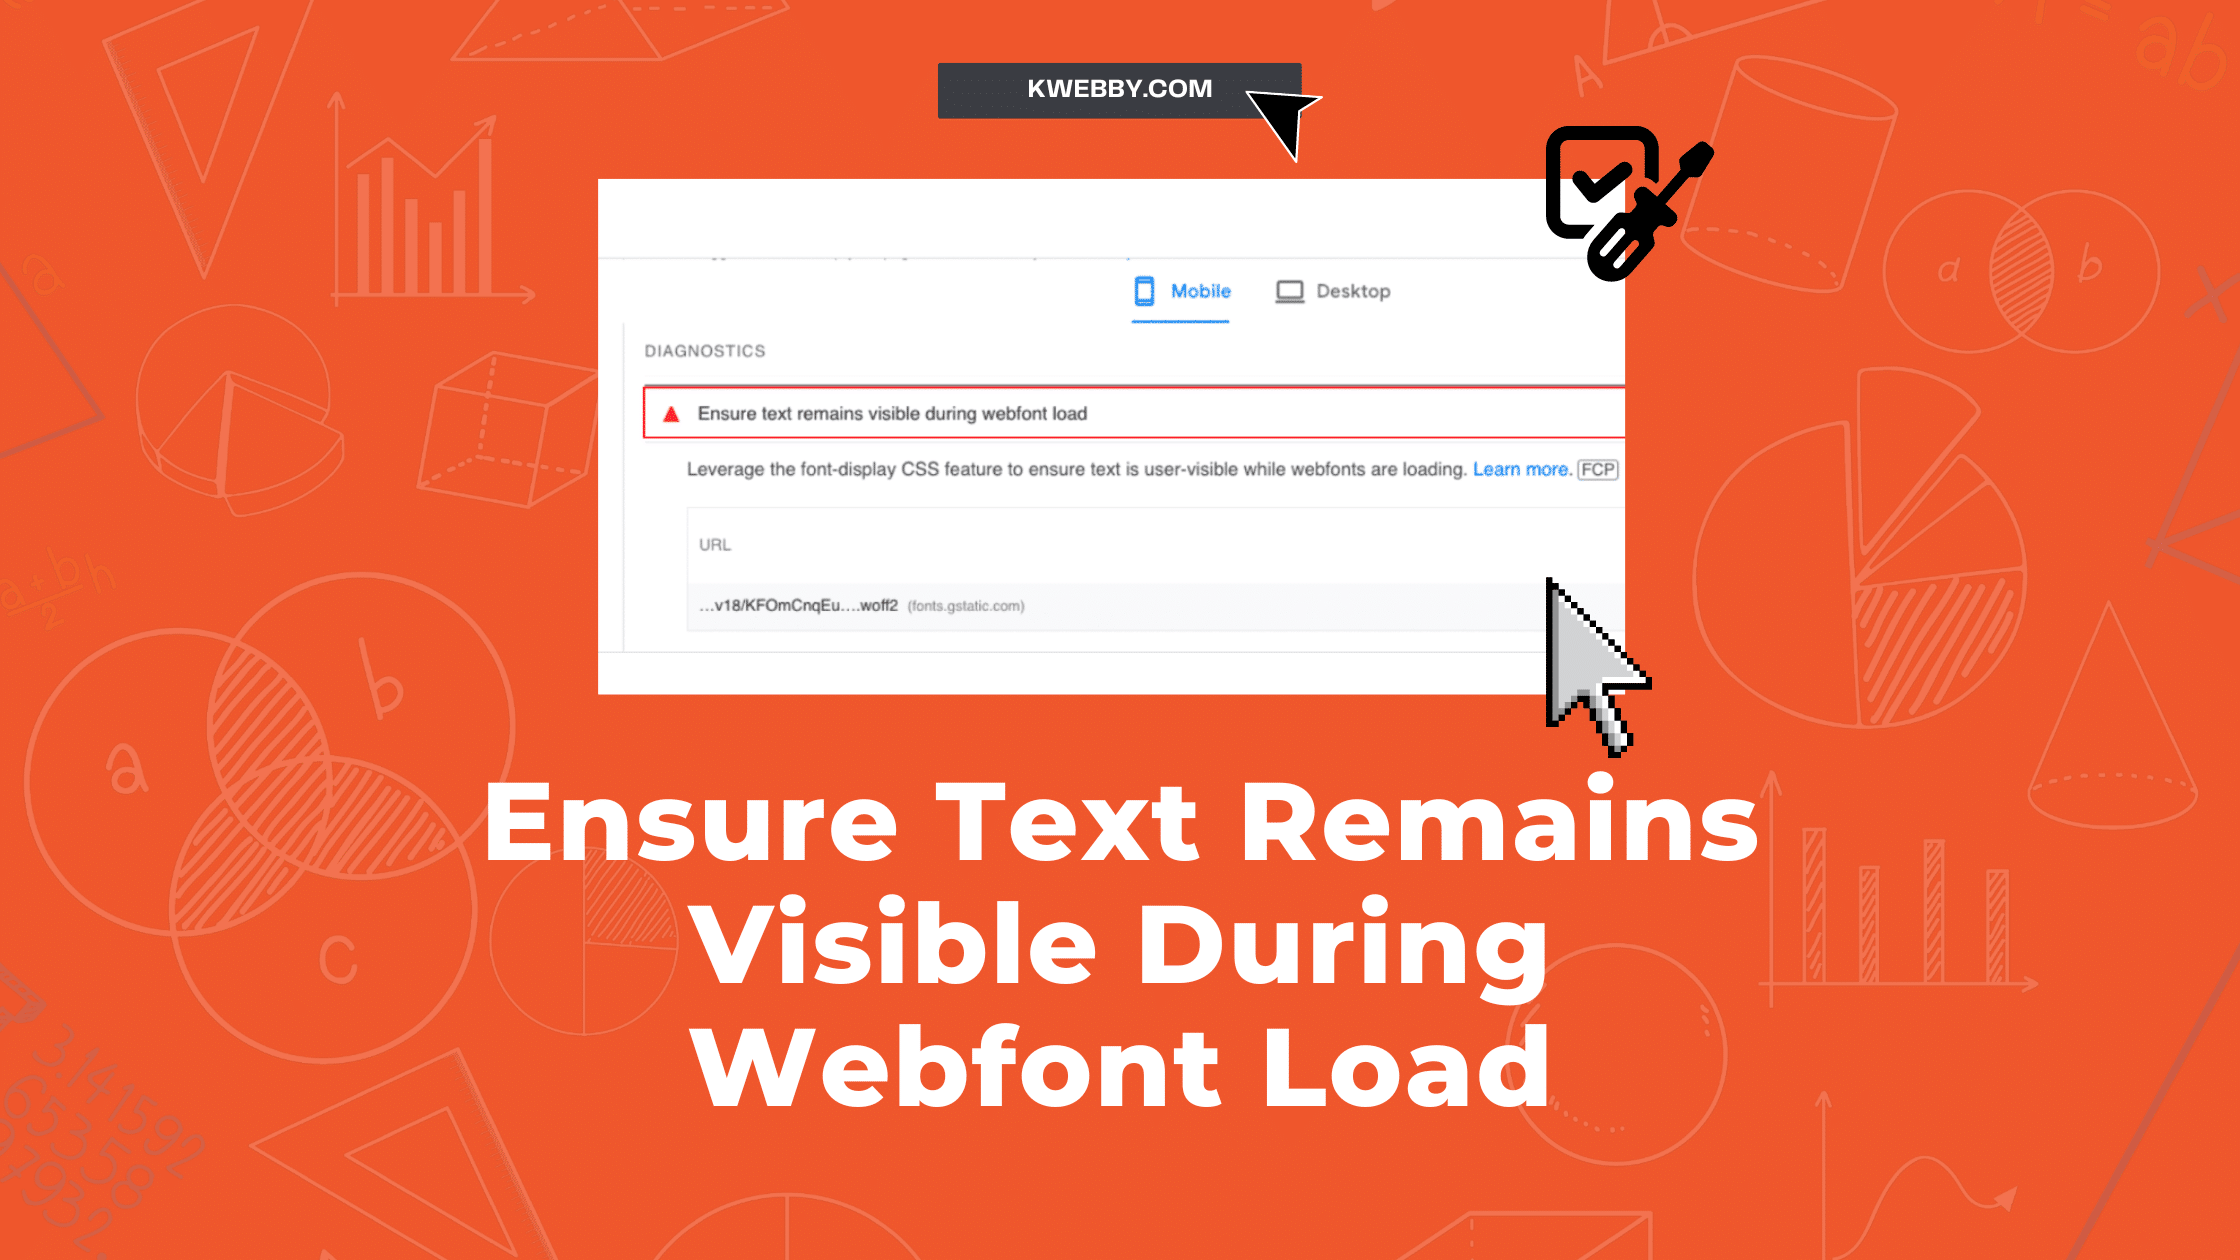 How to Ensure Text Remains Visible During Webfont Load